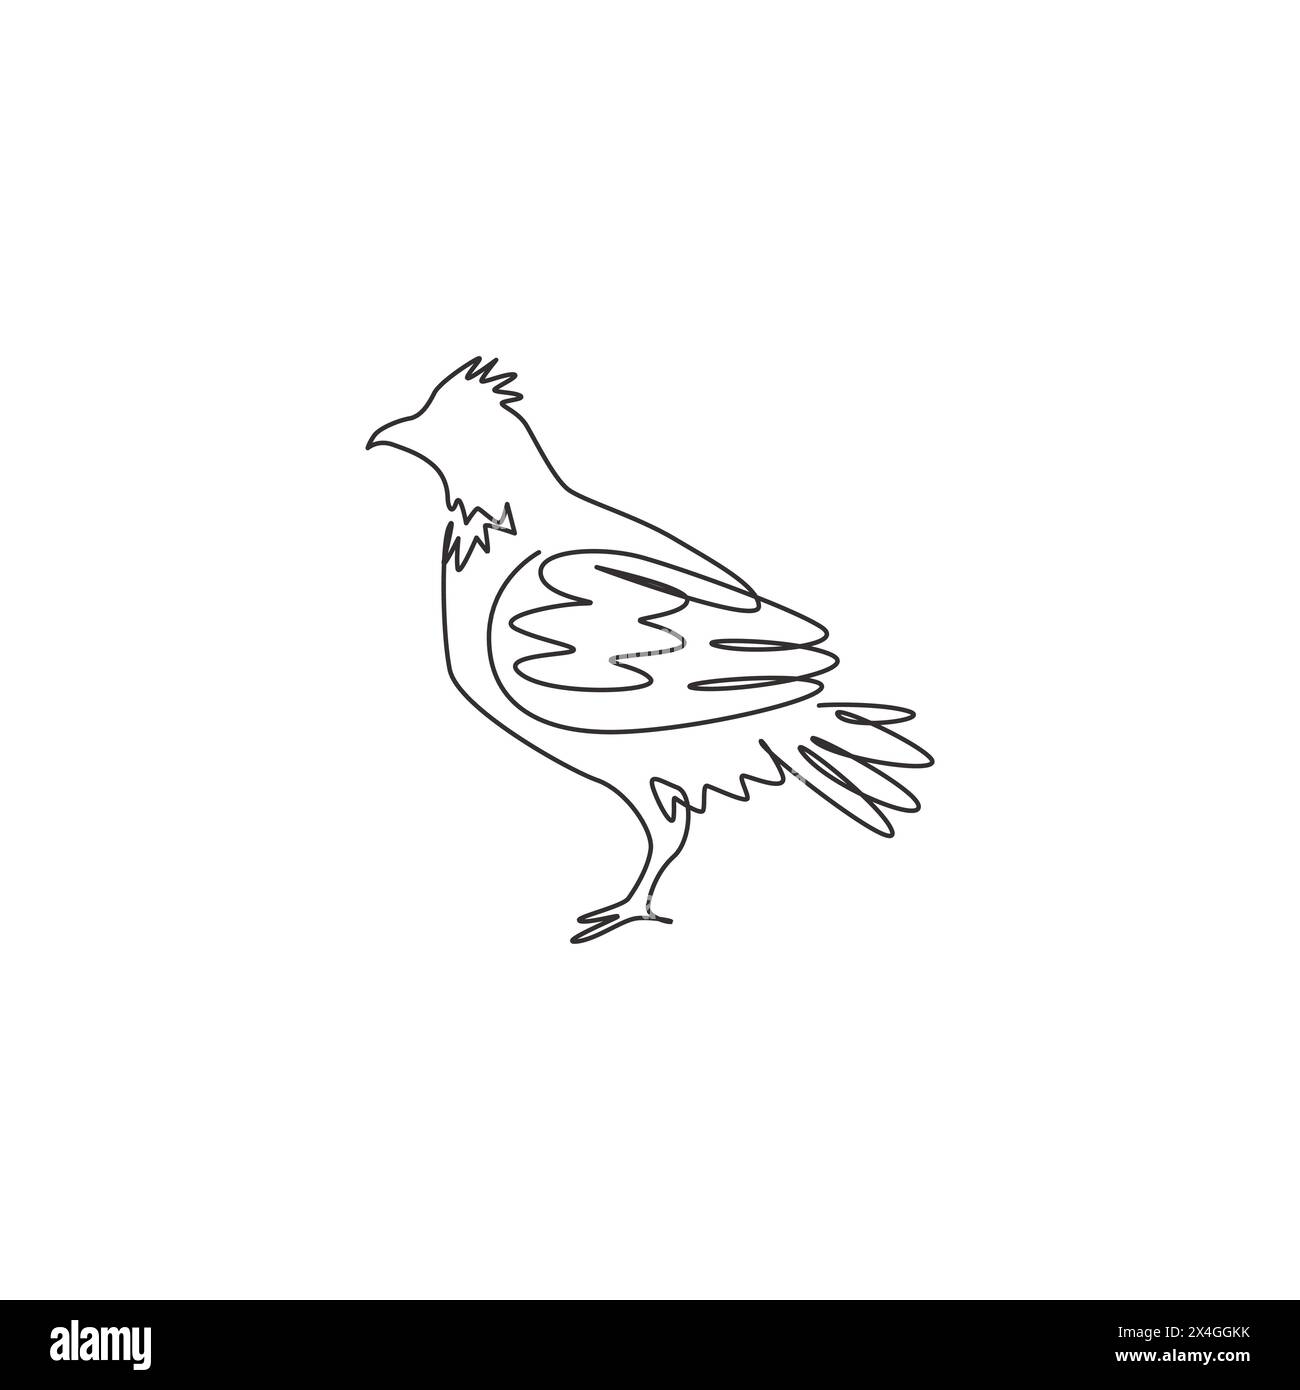 Single one line drawing of adorable grouse bird for foundation logo identity. Shooting bird syndicate mascot concept for tradition icon. Modern contin Stock Vector